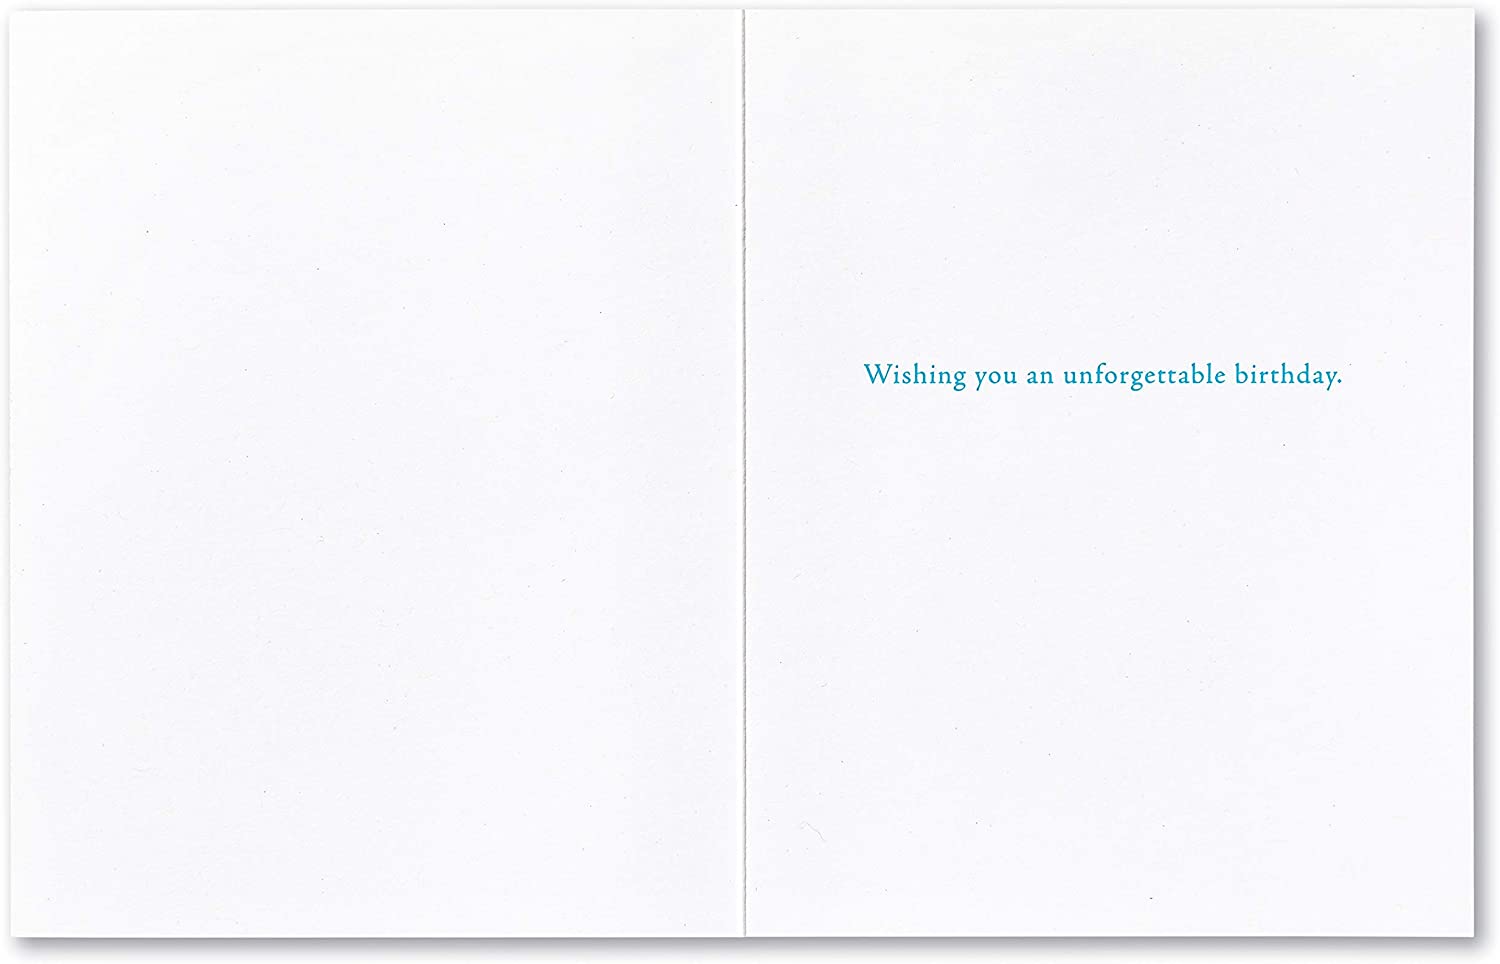 Positively Green Greeting Card - Birthday - “Amazement awaits us at every corner.” by James Broughton - Mellow Monkey